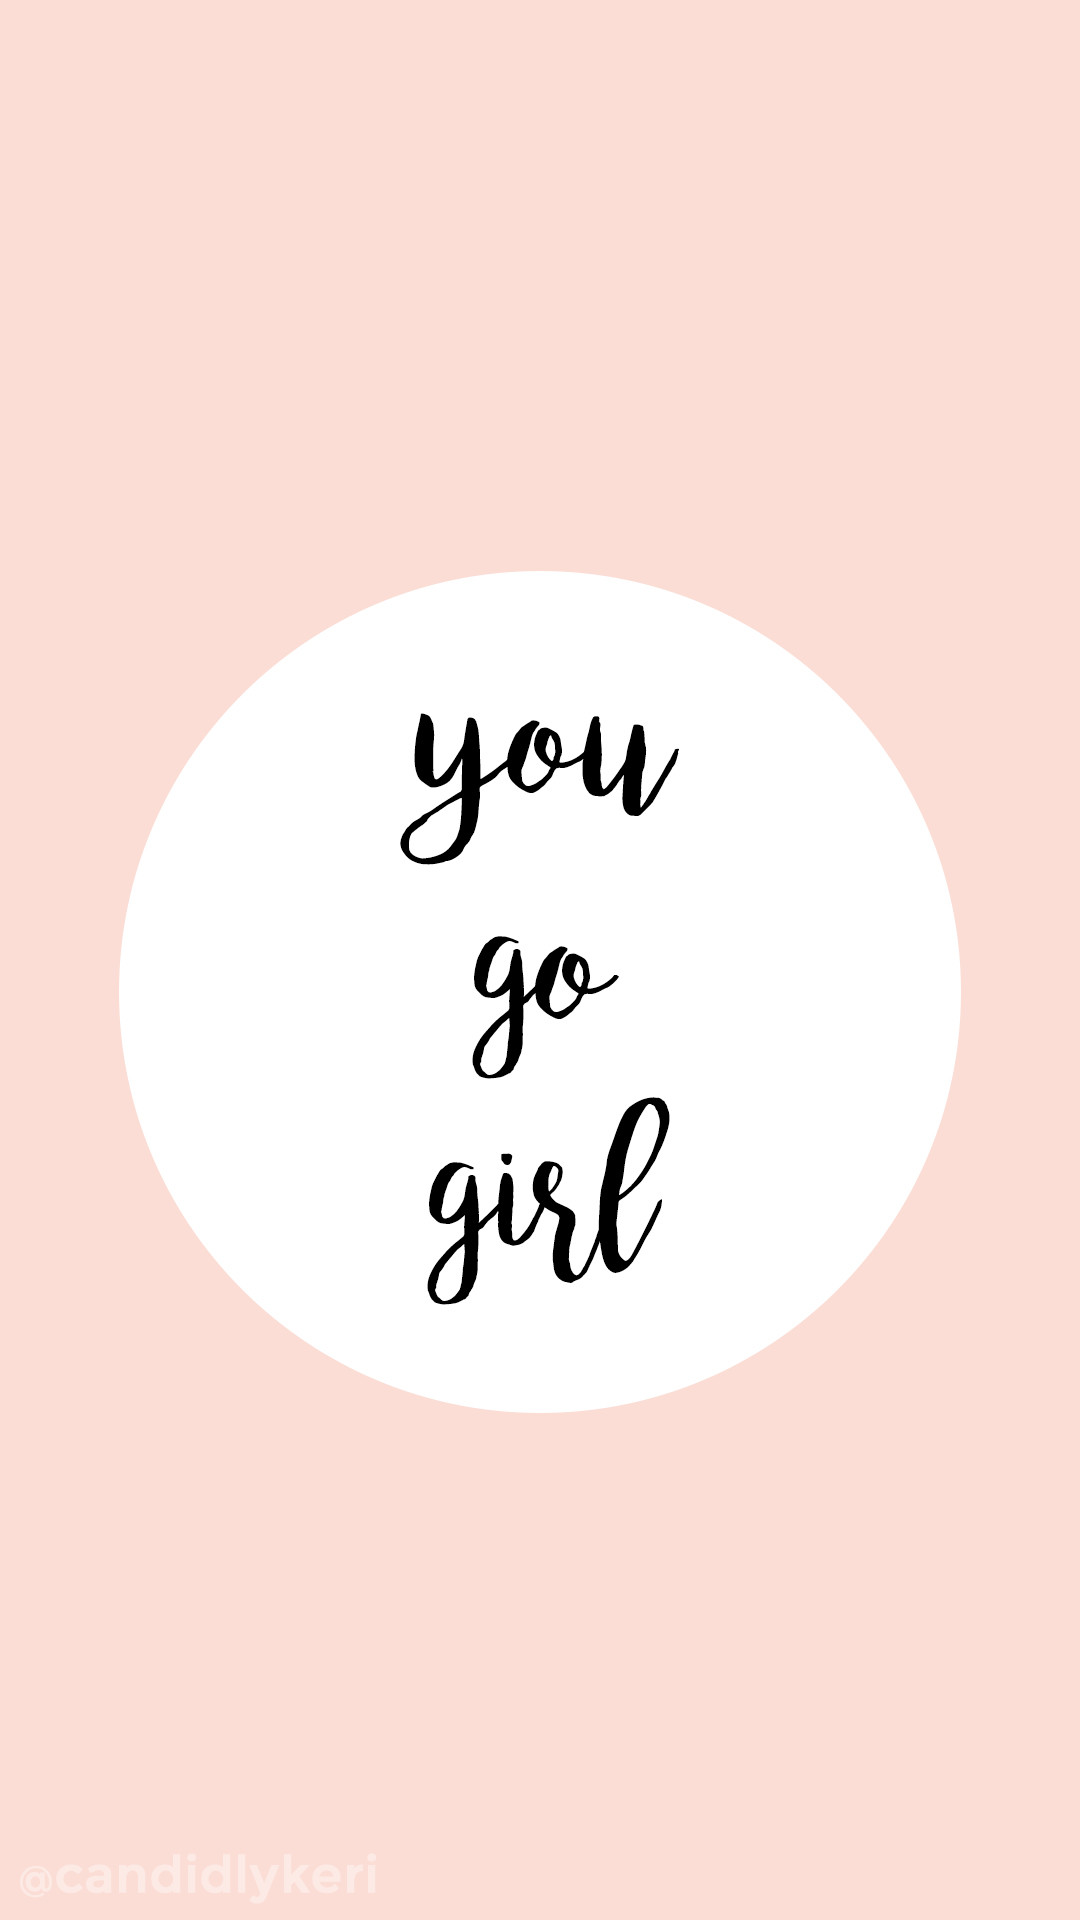 1080x1920 "You Go Girl" Pink quote inspirational background wallpaper you can  download for free on